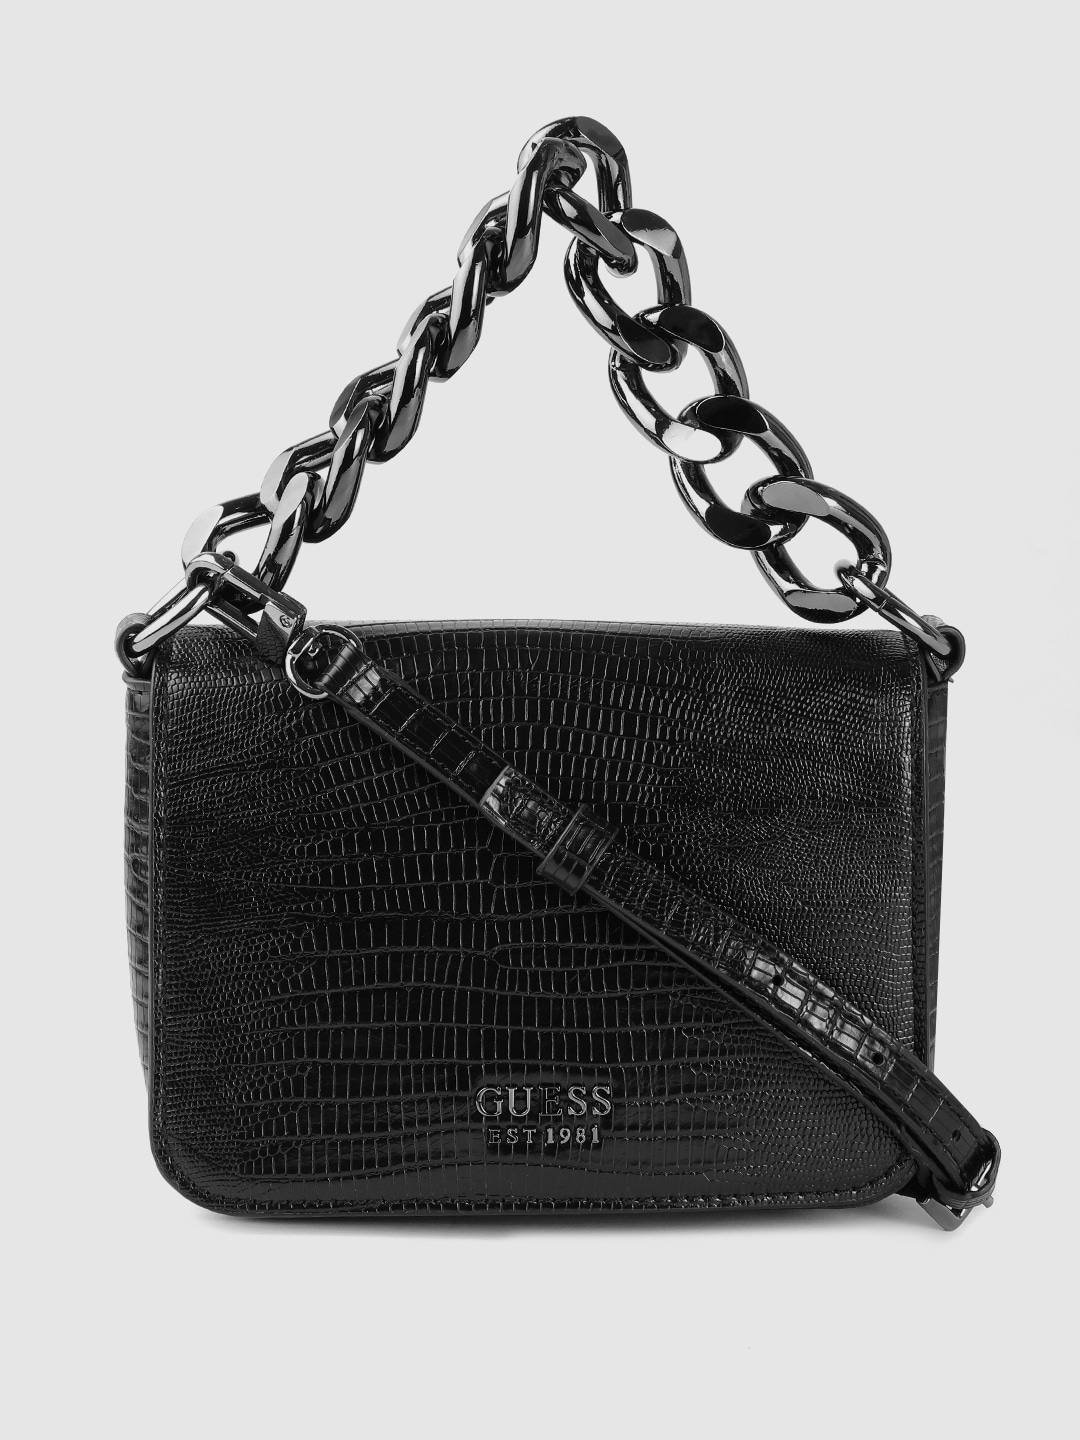 GUESS Women Black Snake Skin Textured Structured Handheld Bag Price in India